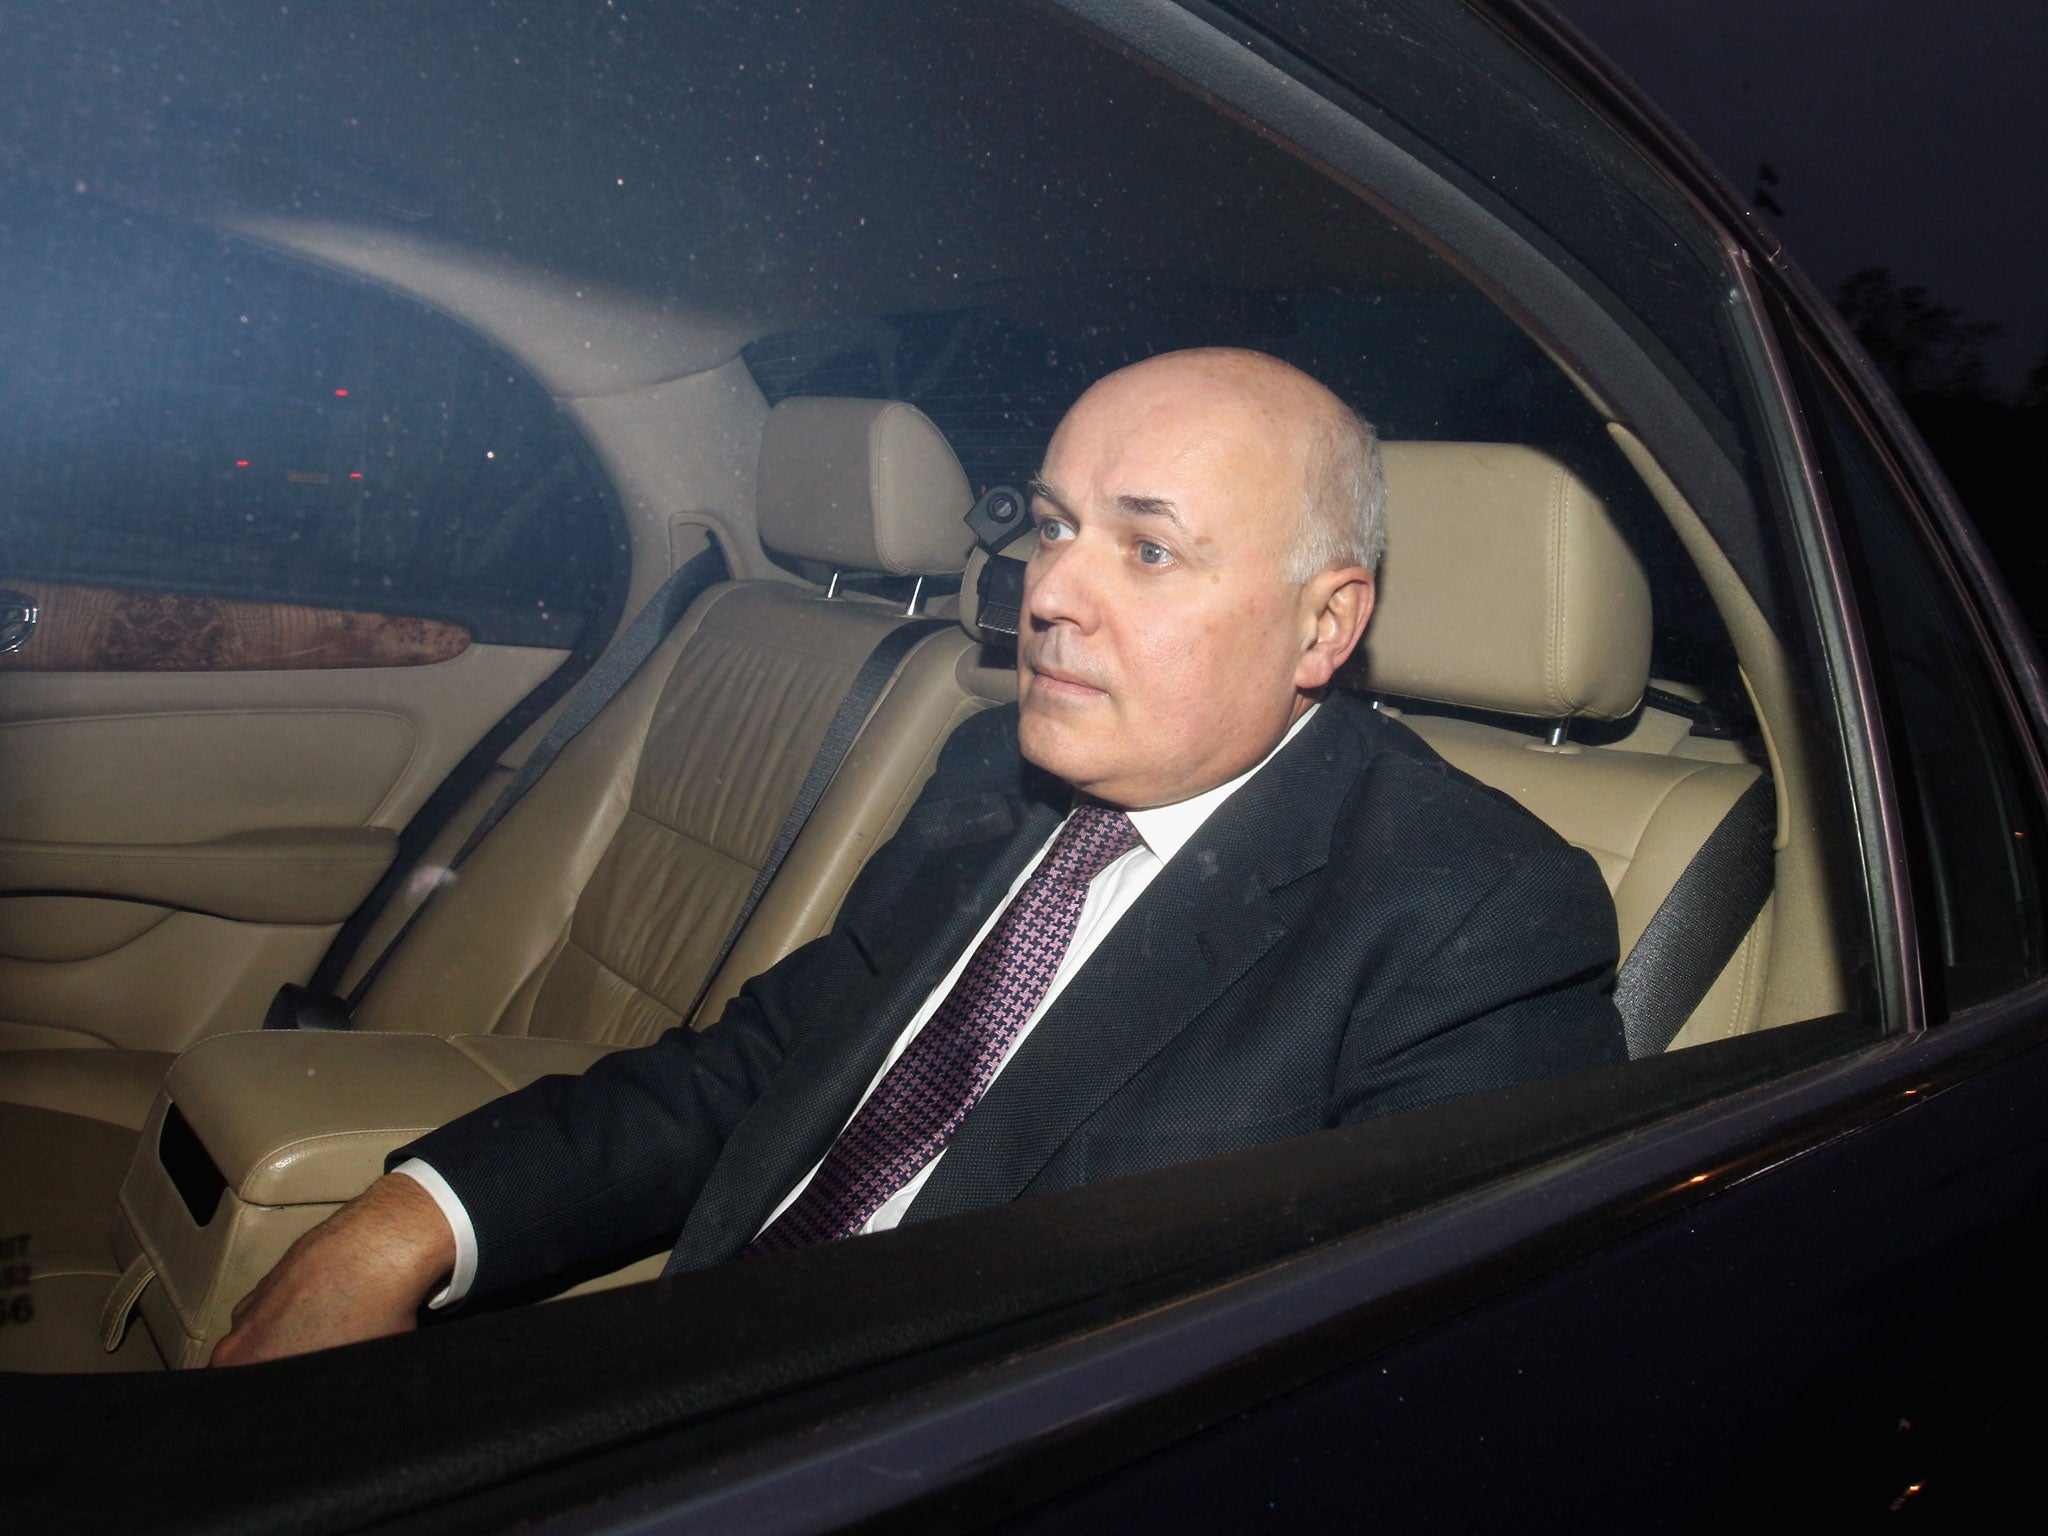 Iain Duncan Smith, leaves the Houses of Parliament on December 12, 2011 in London, England.